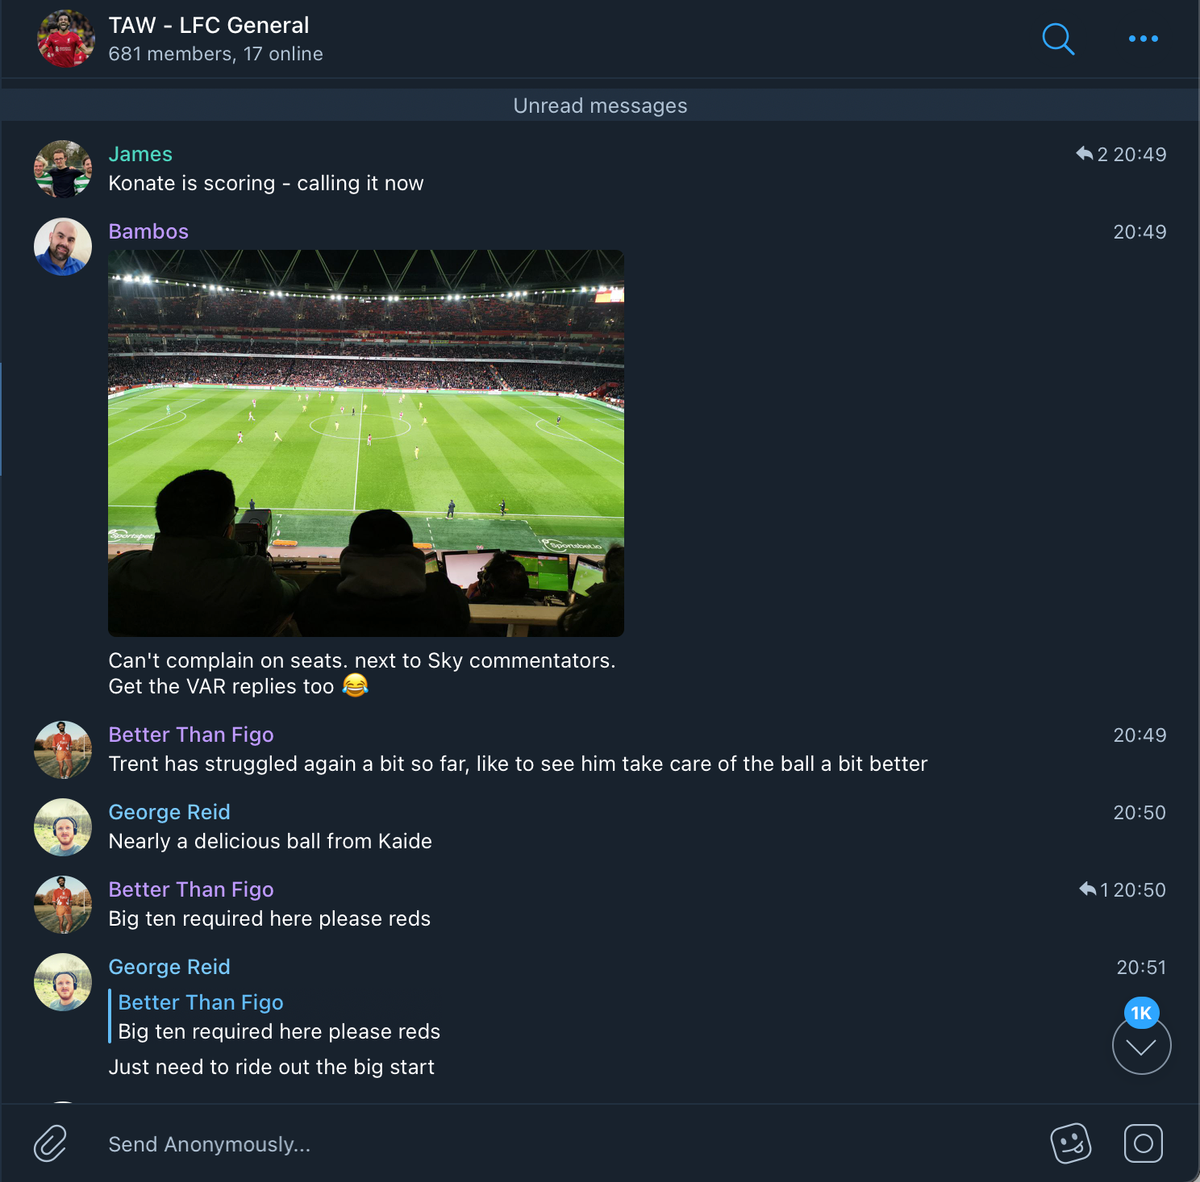 The Anfield Wrap community has a clear purpose: A place for Liverpool football fans to get all the latest insights on their club from the experts, and chat with other passionate fans. The outcome? A highly engaged community that is active 24/7